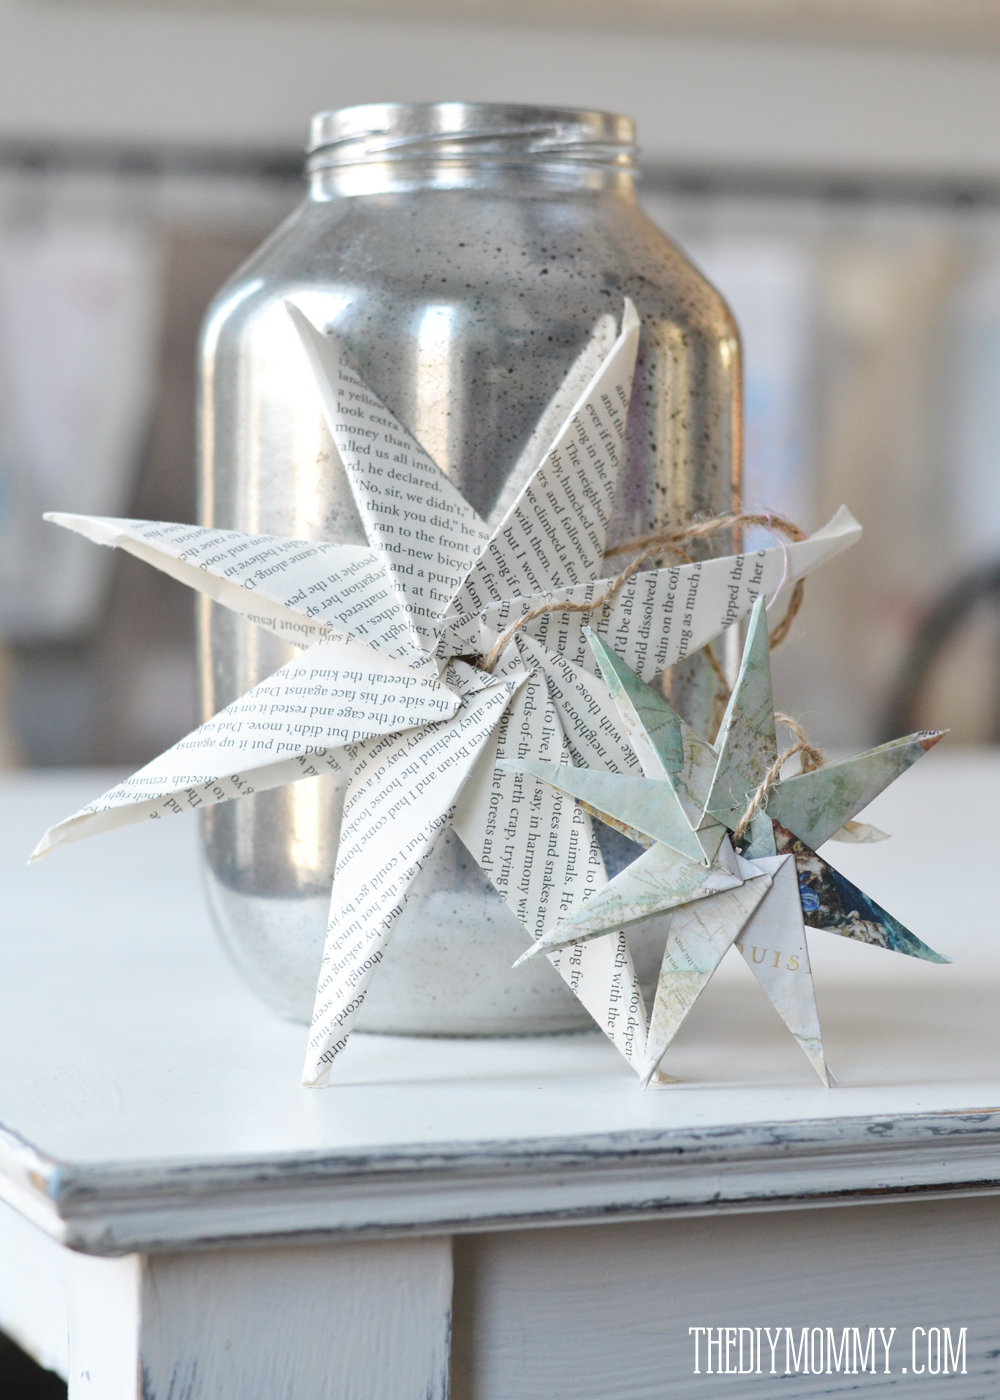 How to Make a Paper Star Ornament from Book Pages